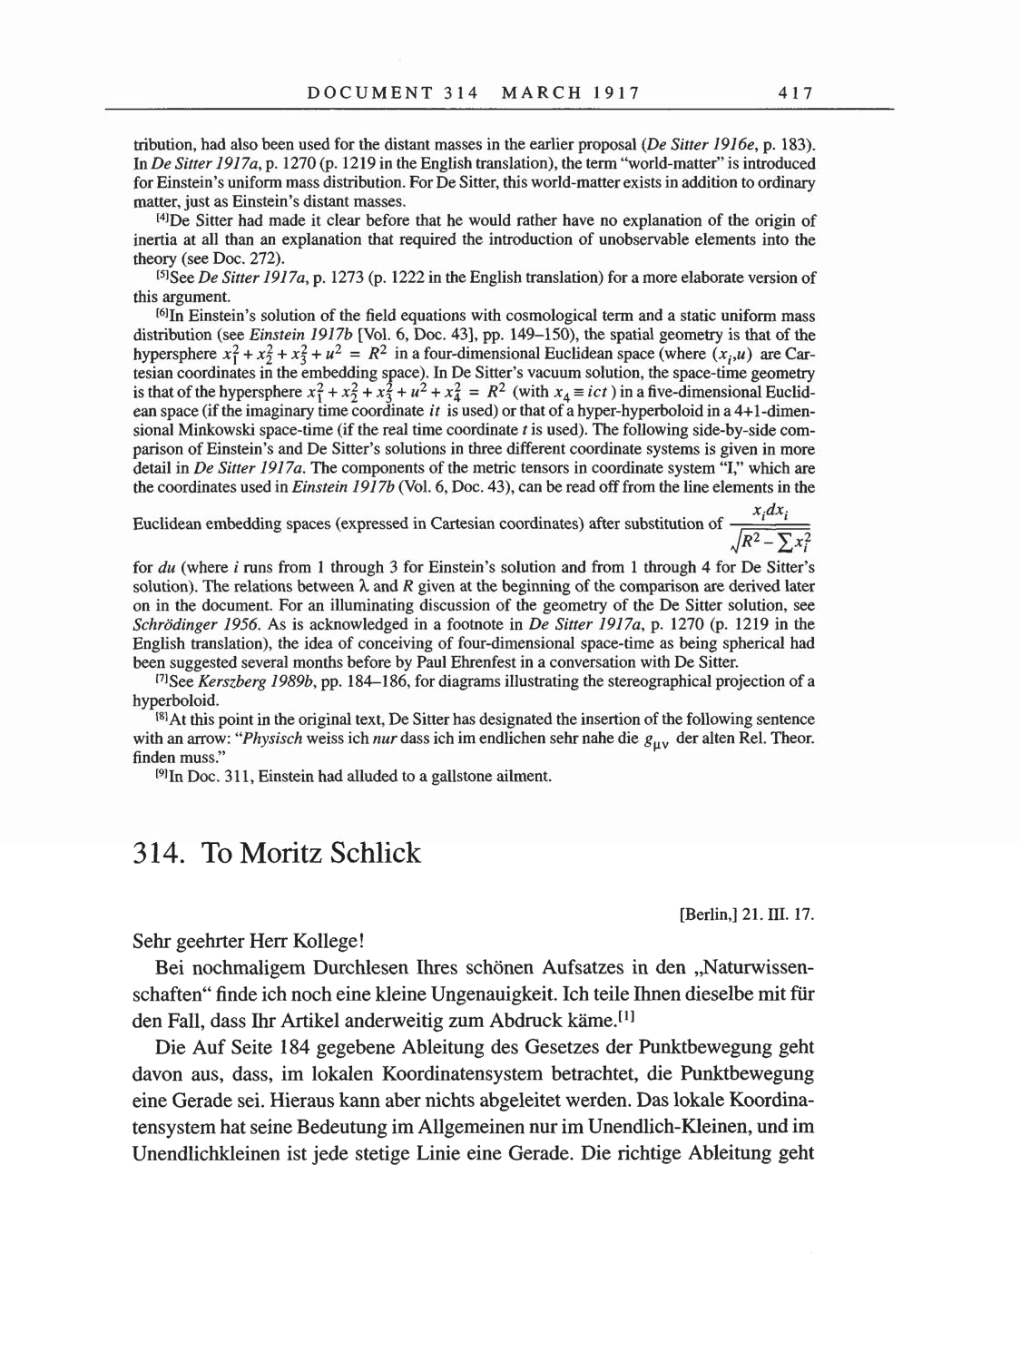 Volume 8, Part A: The Berlin Years: Correspondence 1914-1917 page 417